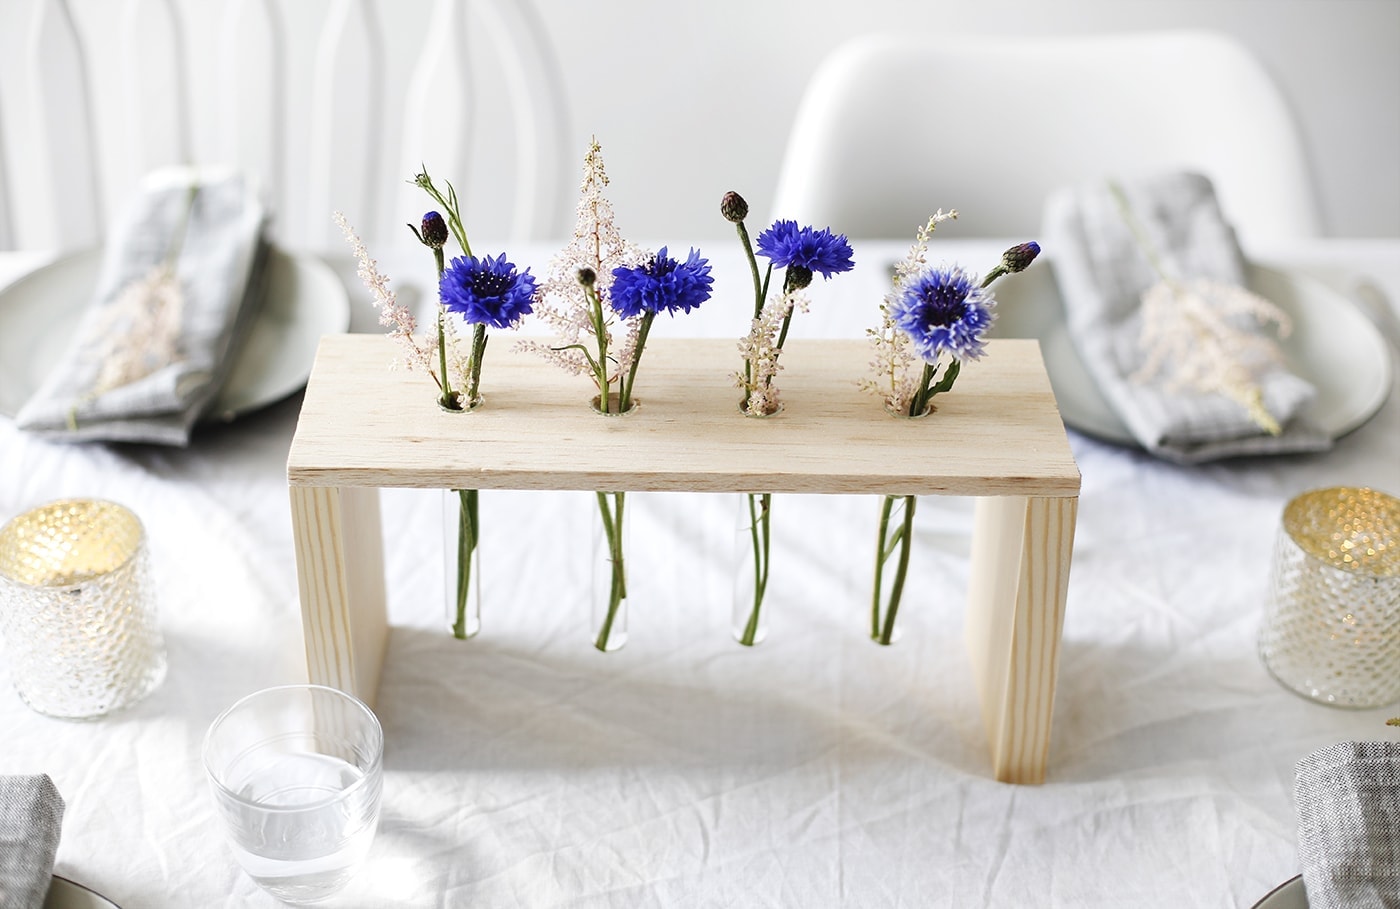 DIY floral table centre made with wood and test tubes | easy craft tutorial perfect for entertaining | home ideas